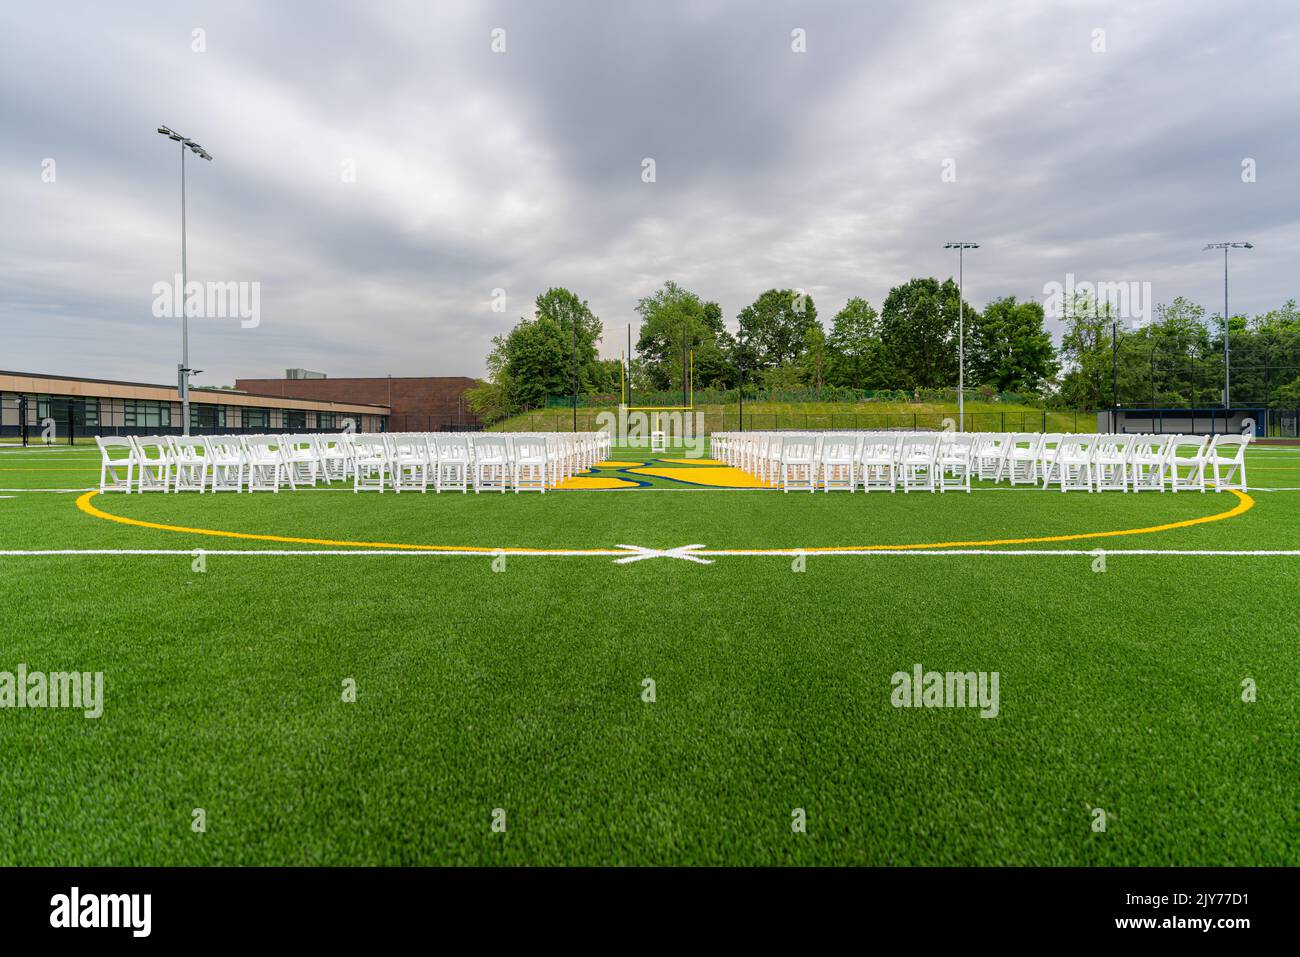 White chairs set-up in rows on a green synthetic turf athletic field for a high school graduation ceremony. Stock Photo